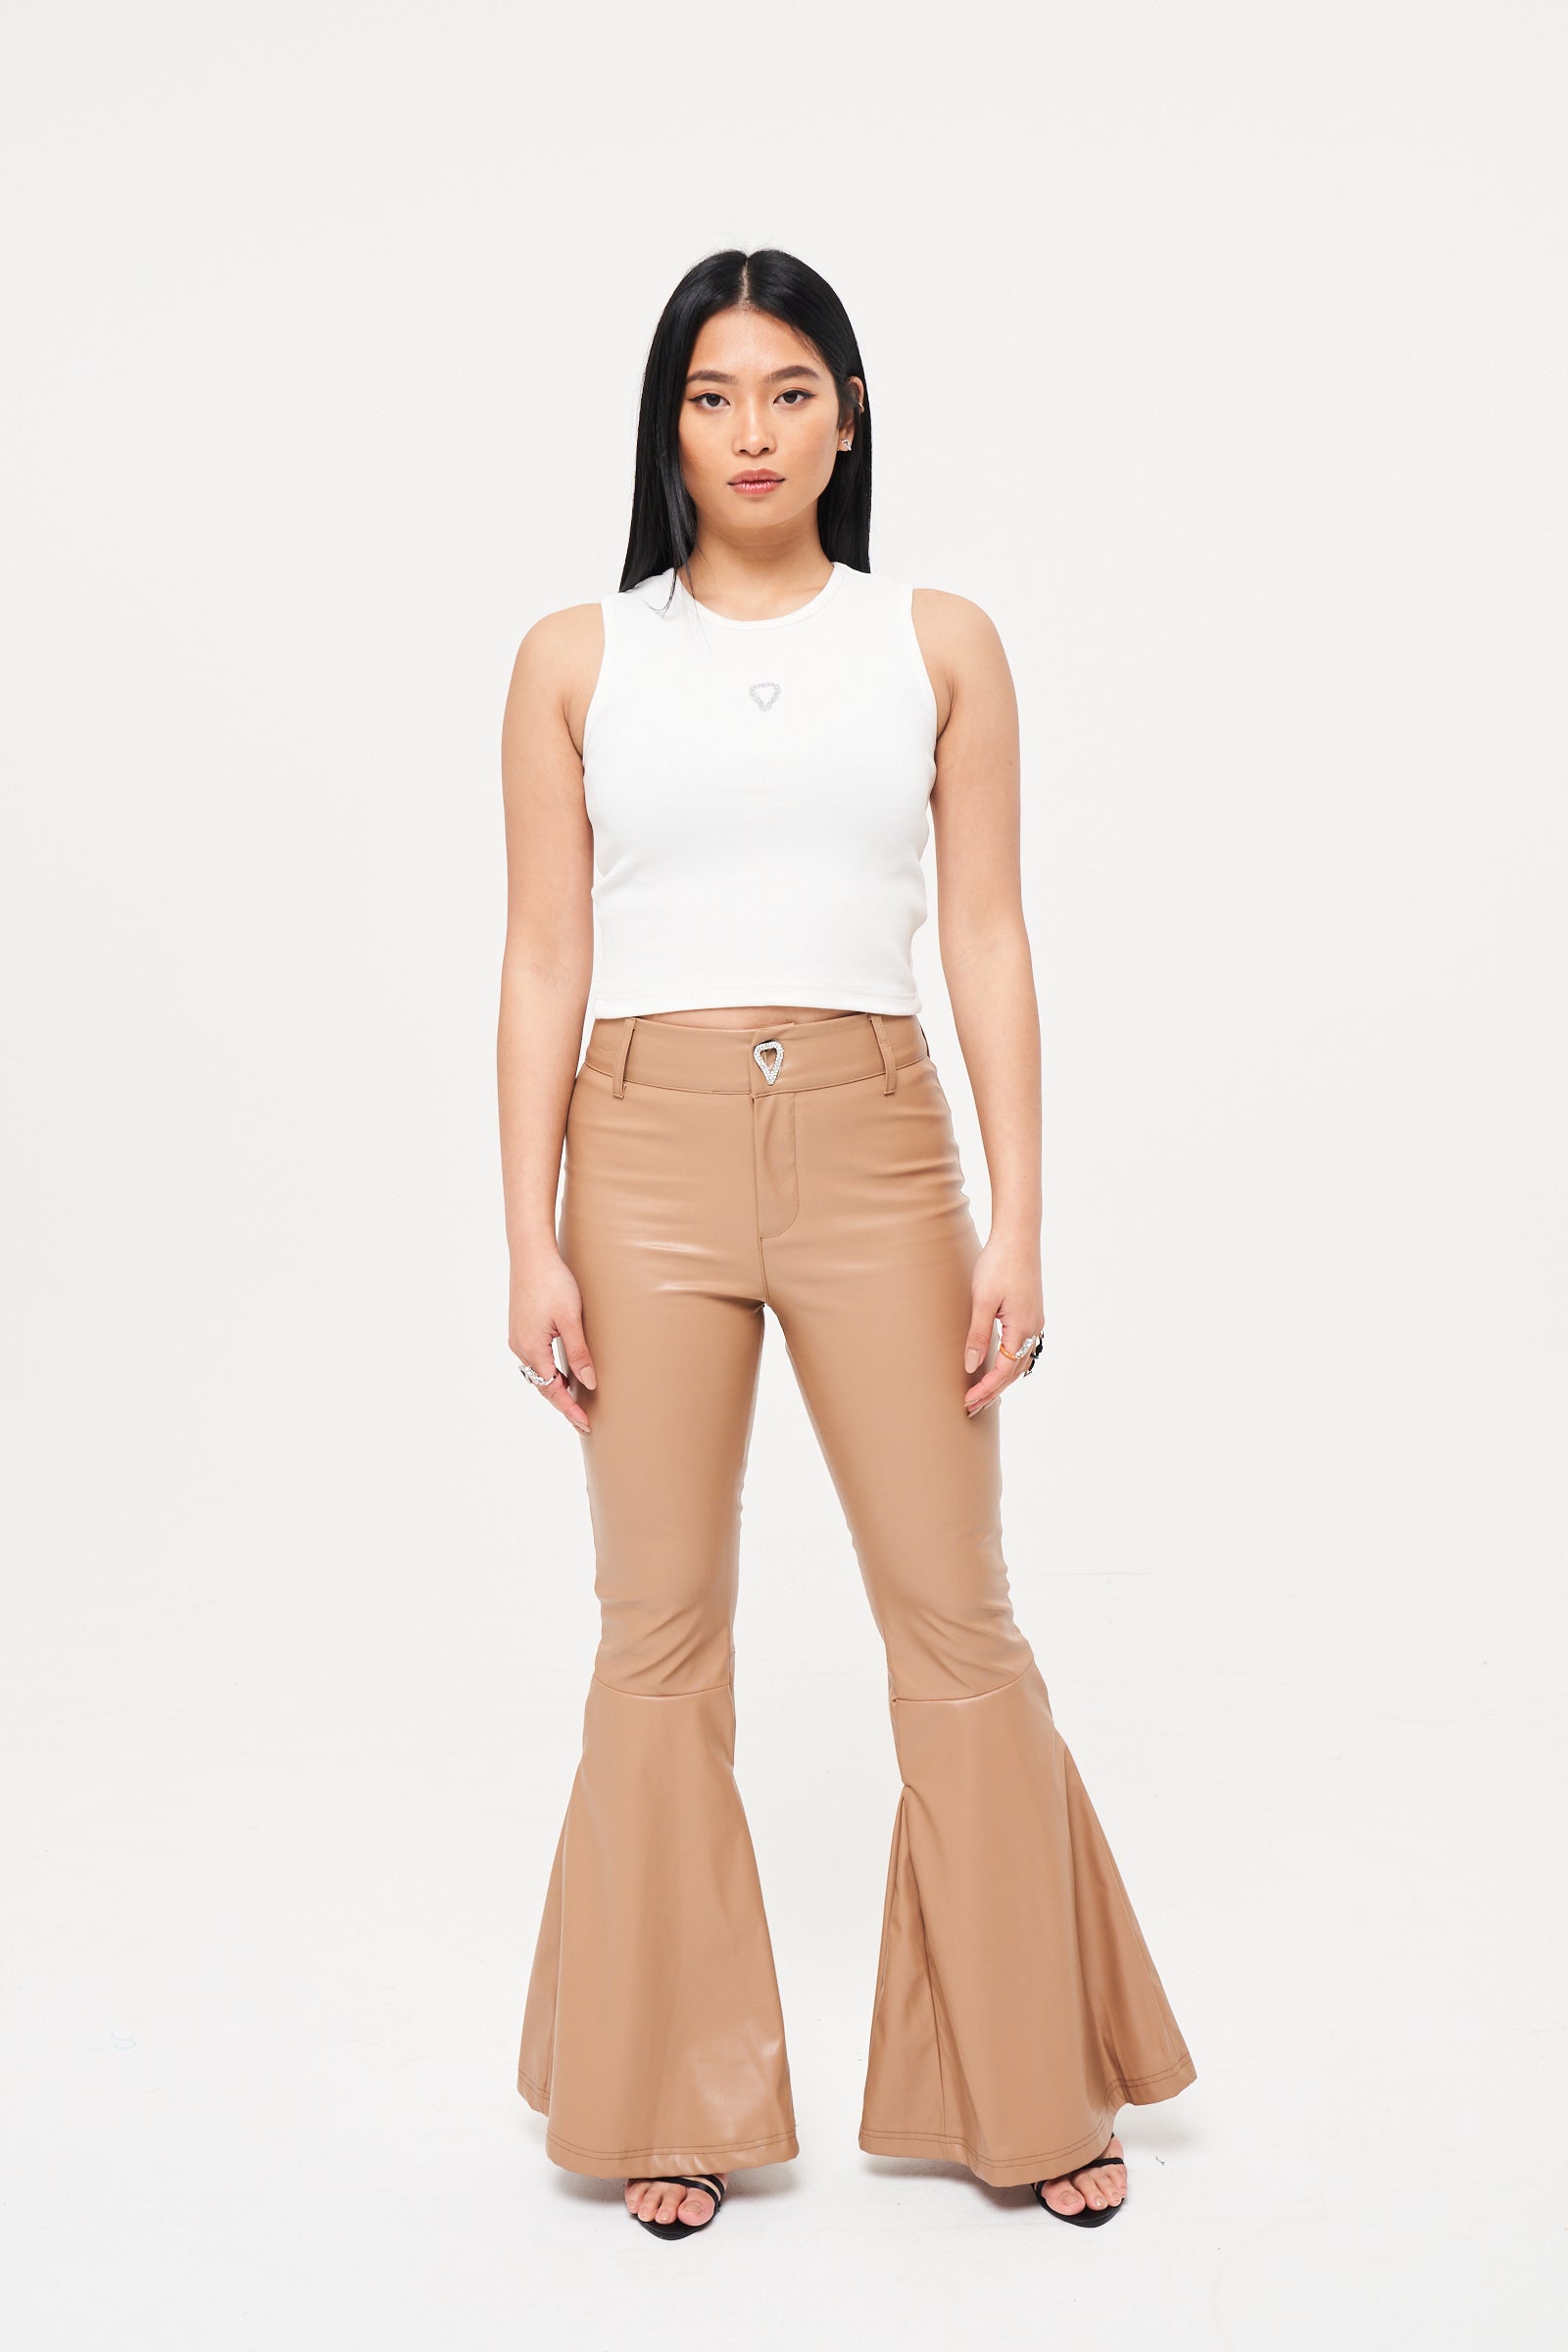 Vegan Leather Structured Flare Pant in Nude - Basliq